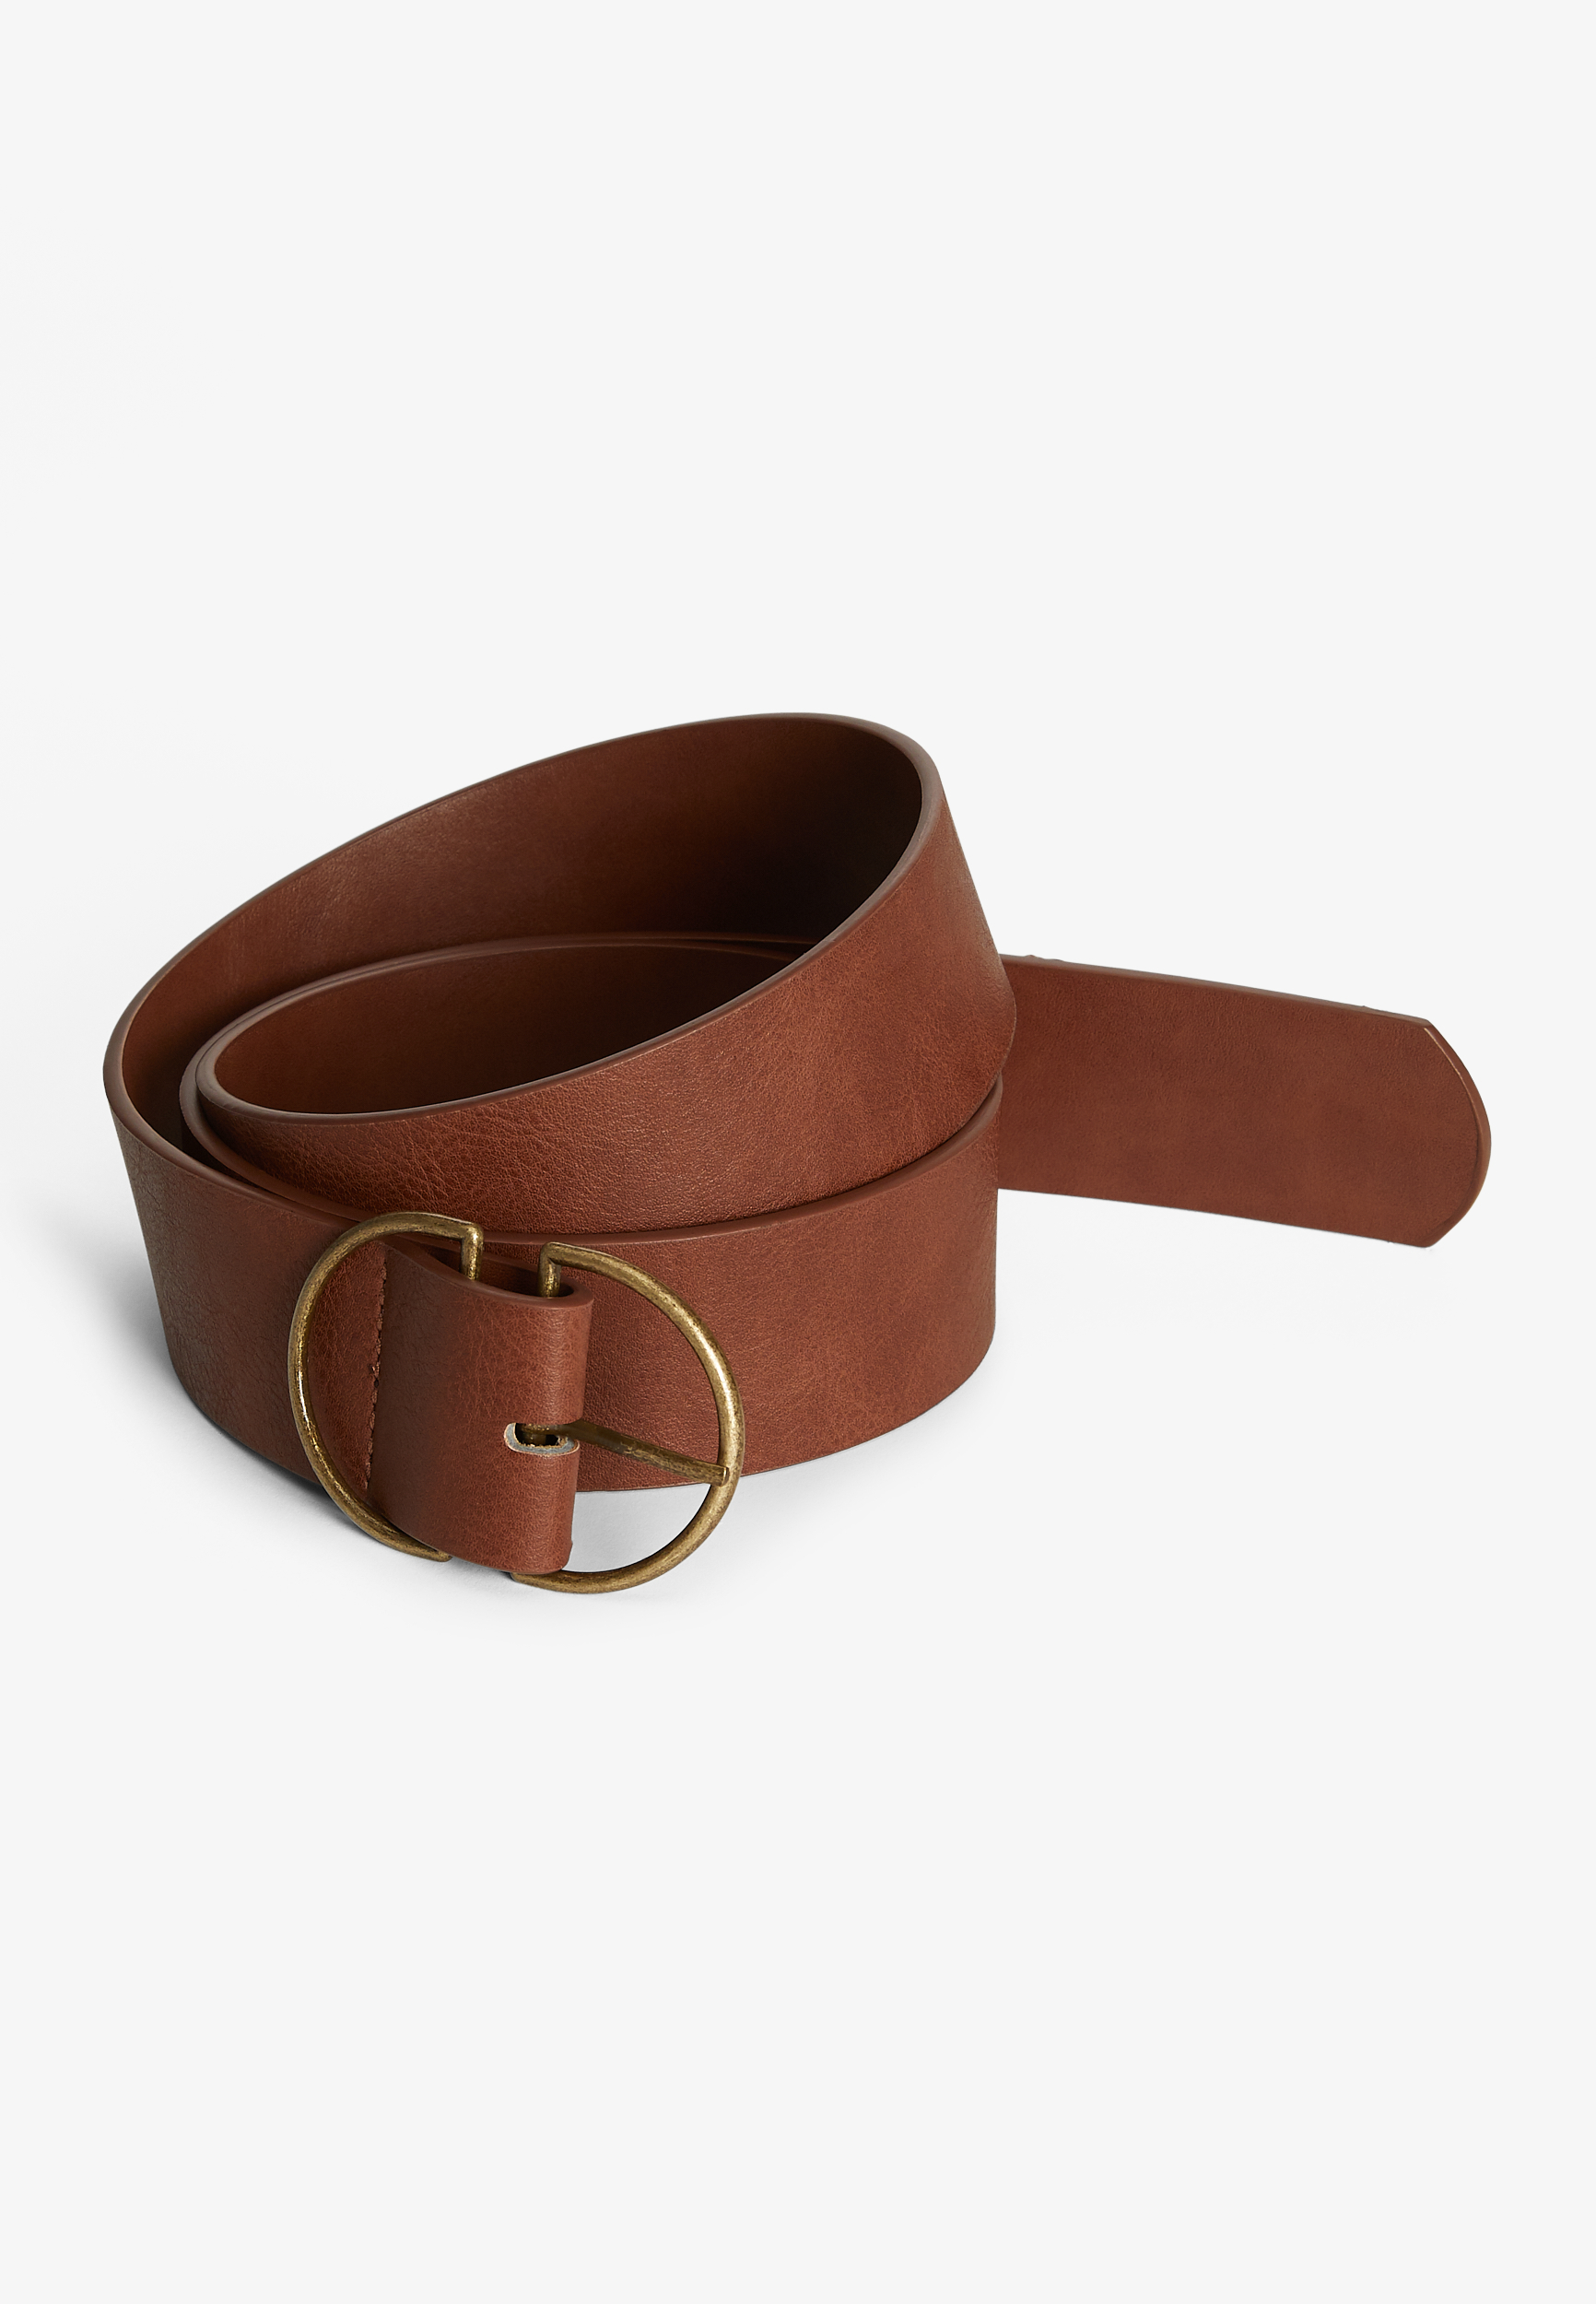 ByTheR Solid Brown Premium Whole Leather Double Ring Buckle Vintage Fashion Belt 